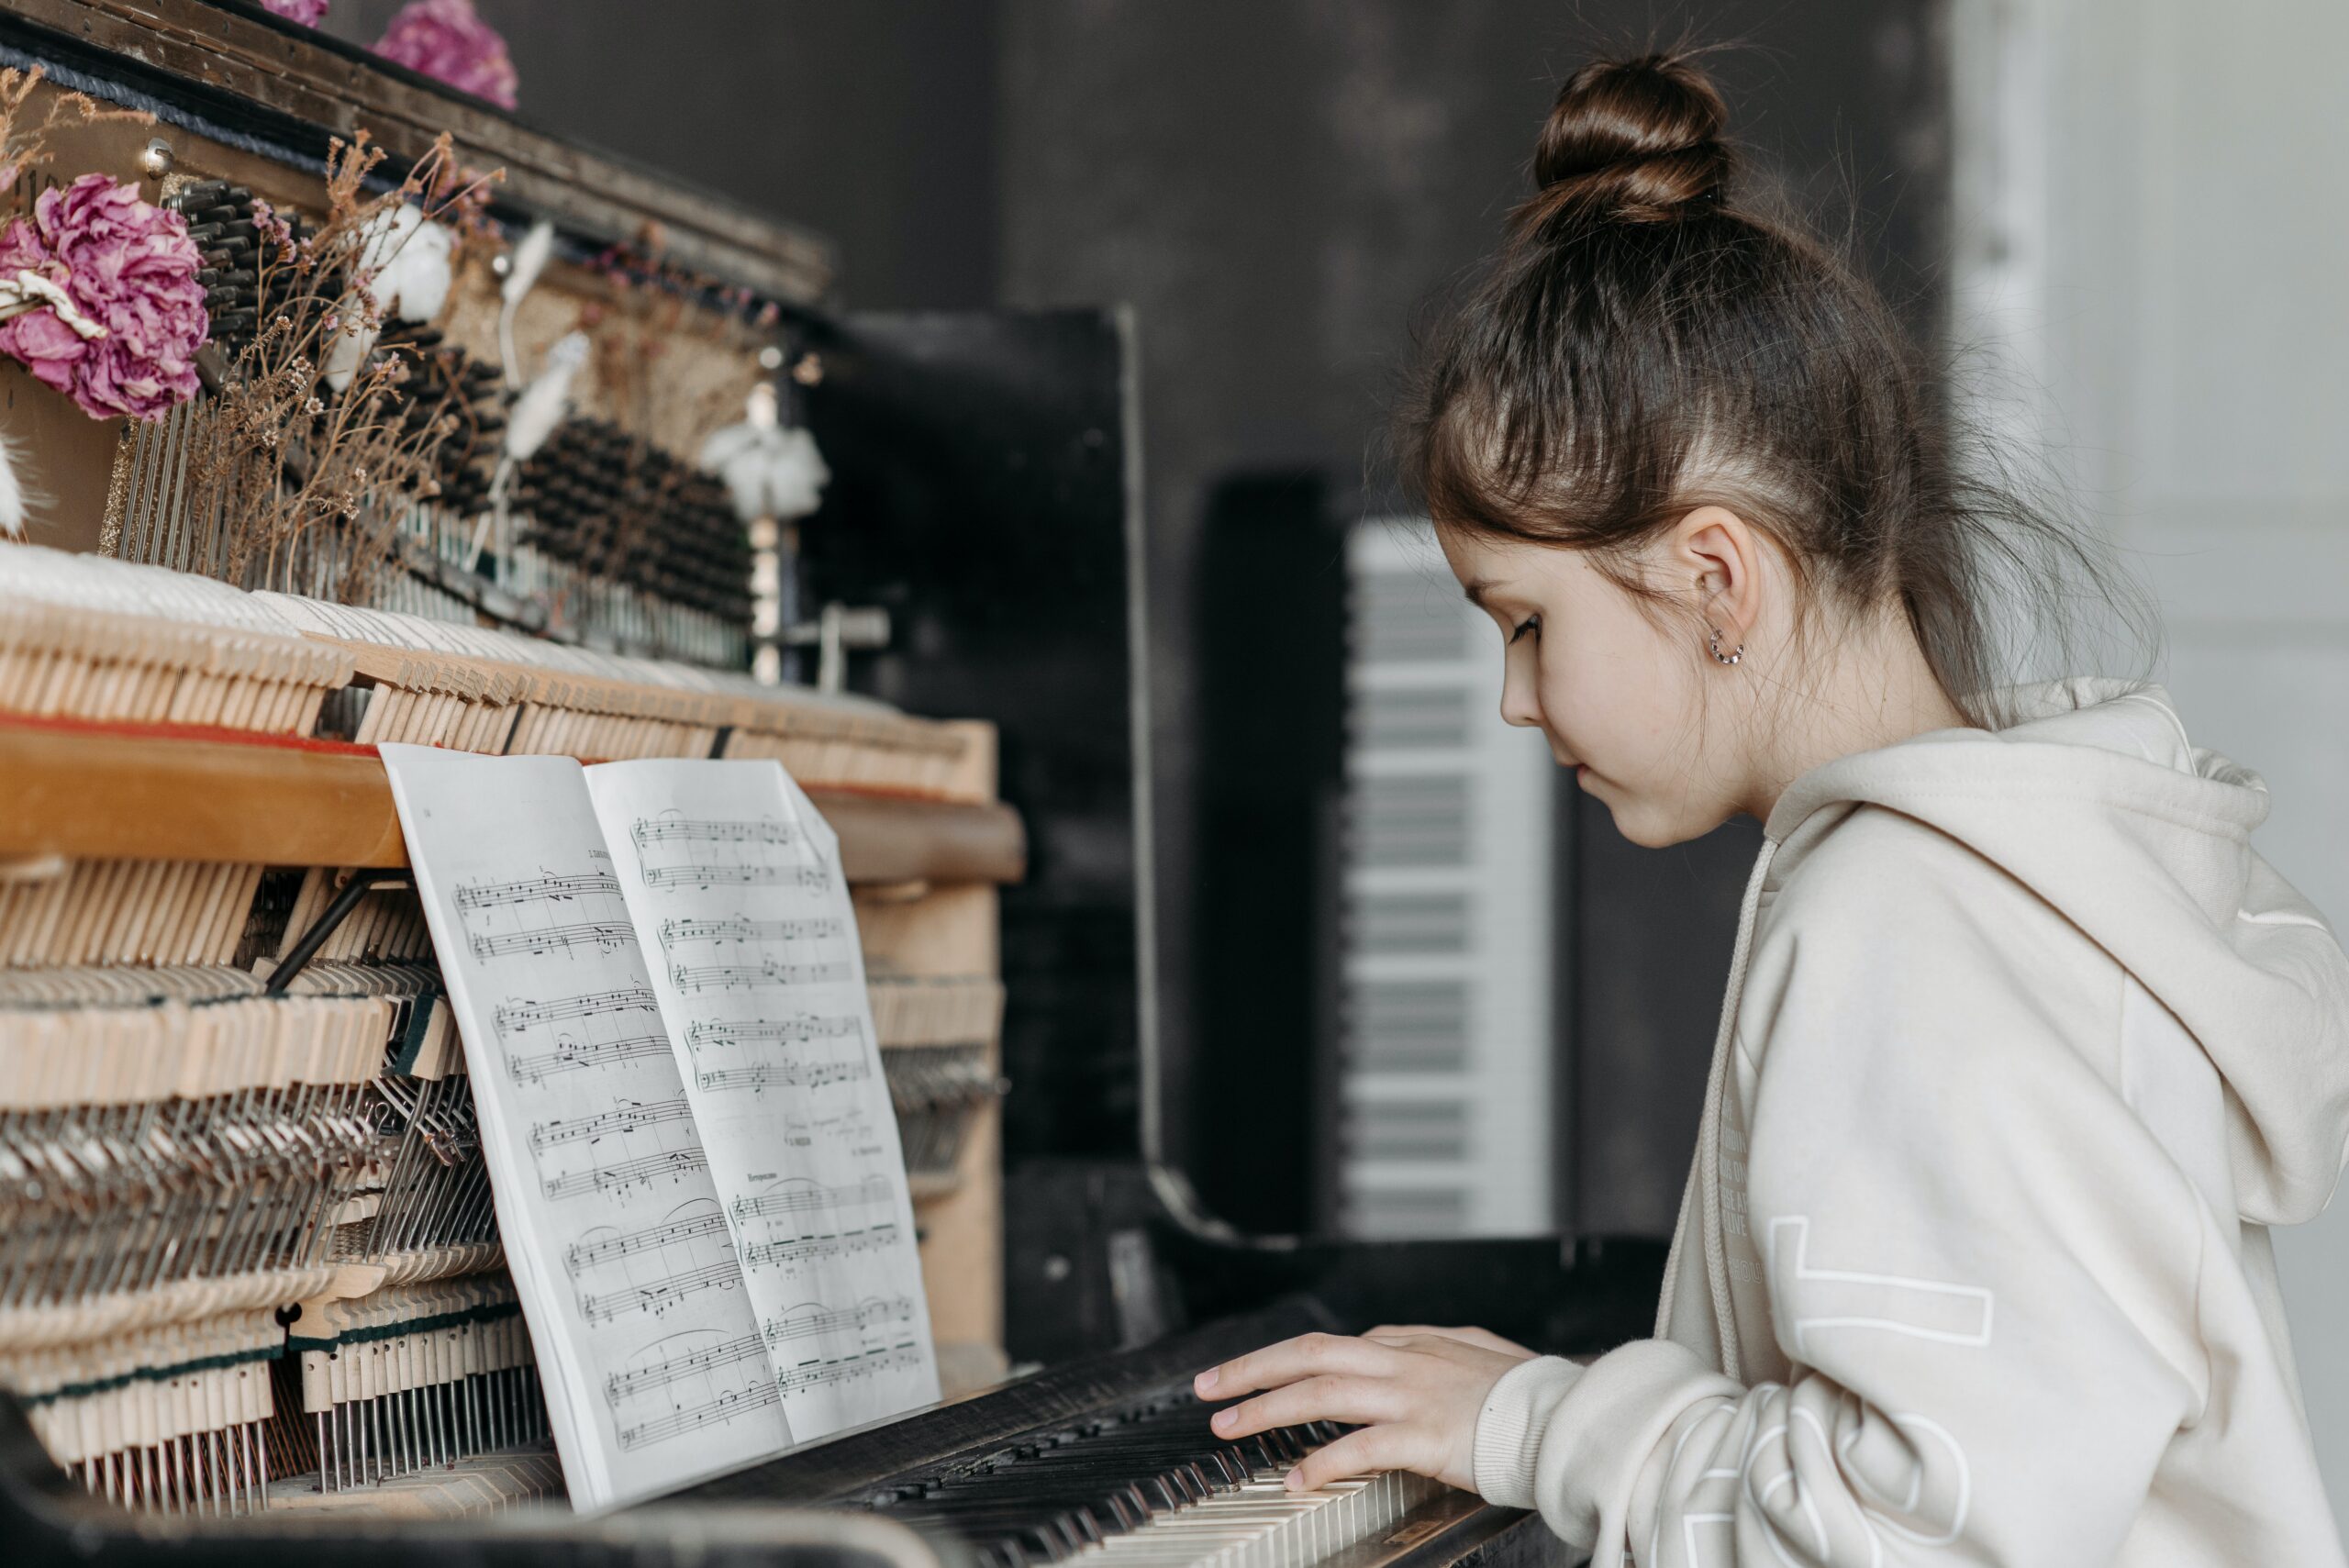 Little girl using music sheets to play the piano